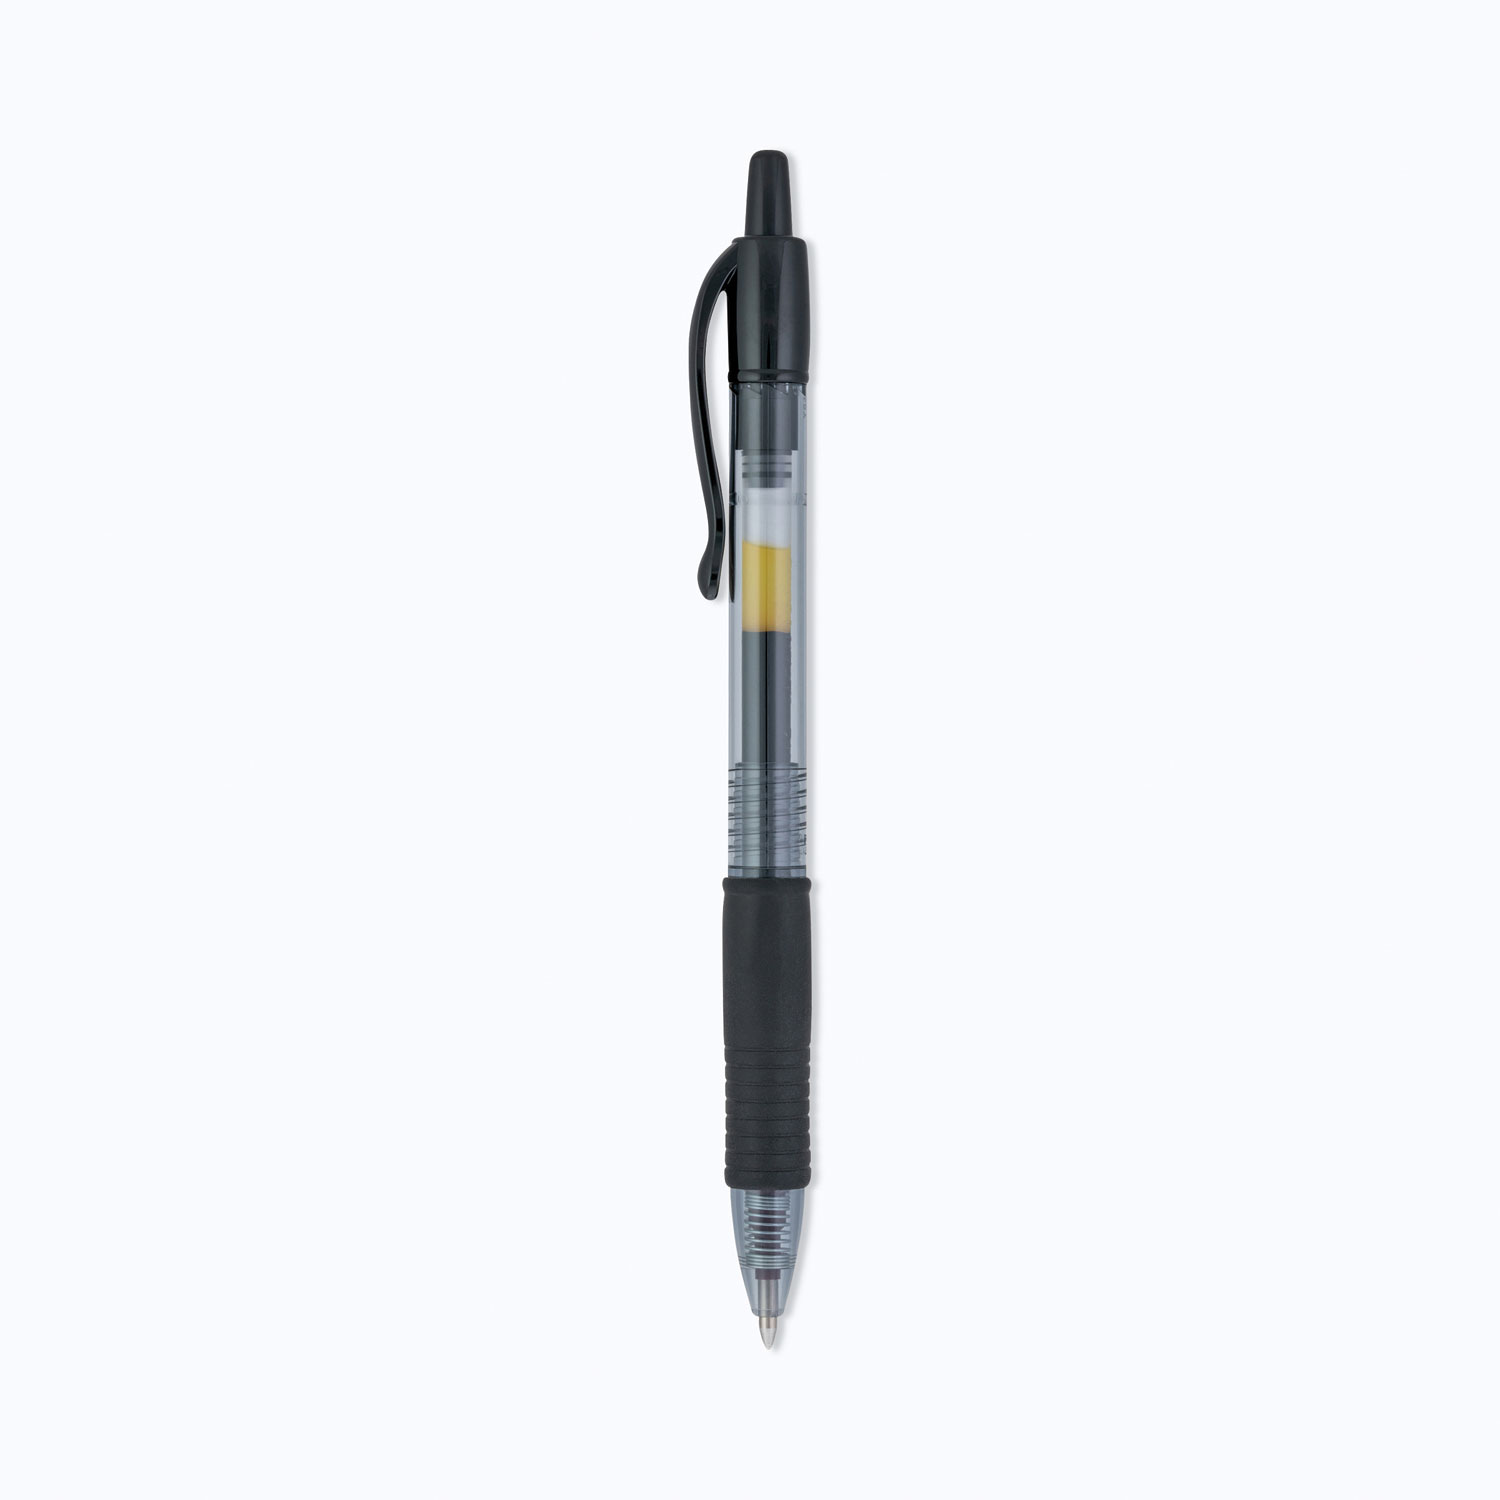  Pilot, G2 Premium Gel Roller Pens, Extra Fine Point 0.5 mm,  Pack of 4, Black : Office Products